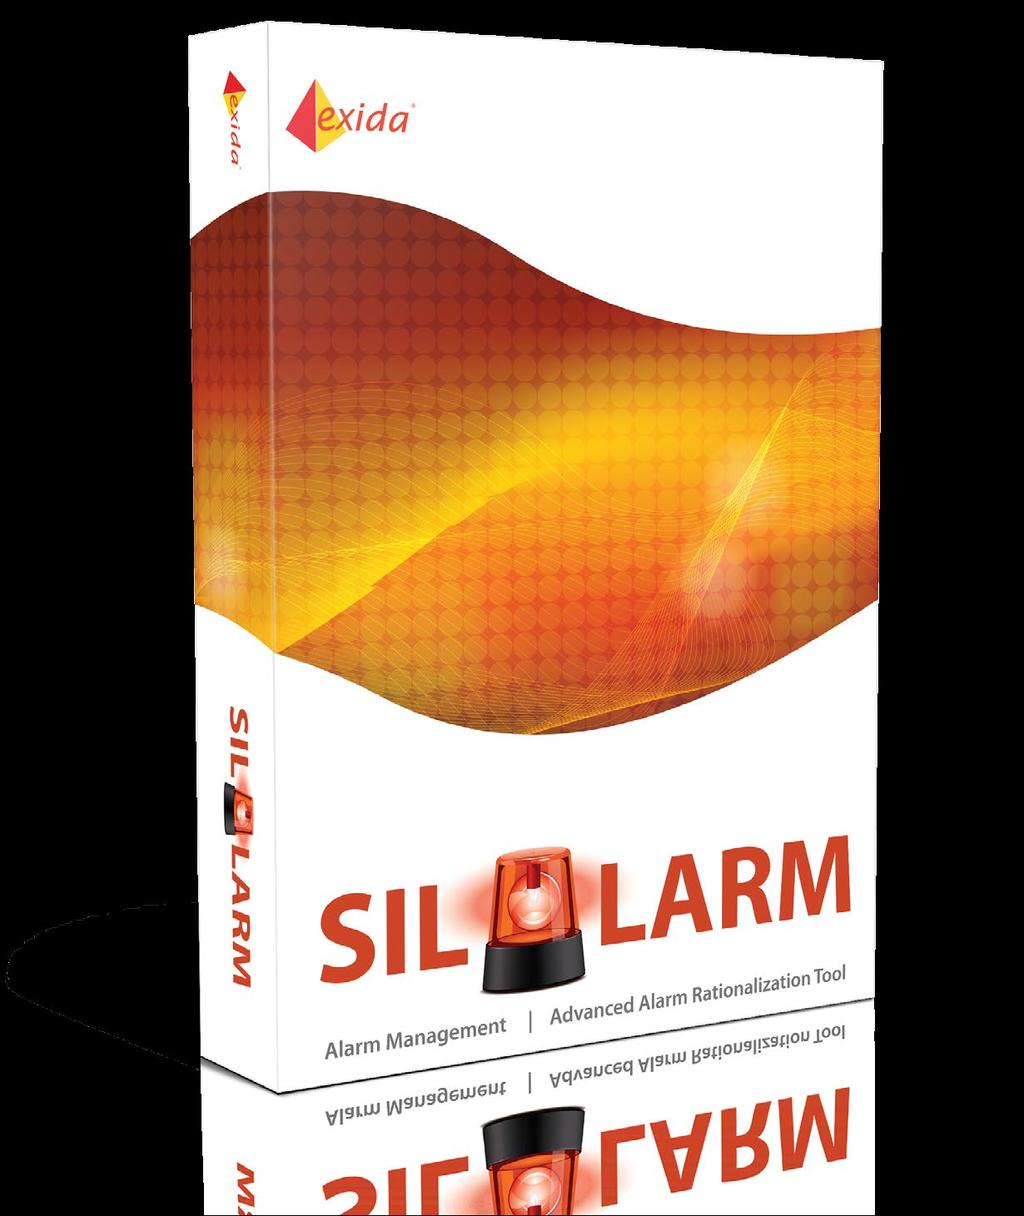 Alarm Rationalization Made Easy with SILAlarm SILAlarm is a tool for facilitating and documenting the results of alarm rationalization in a master alarm database for both new (greenfield) and